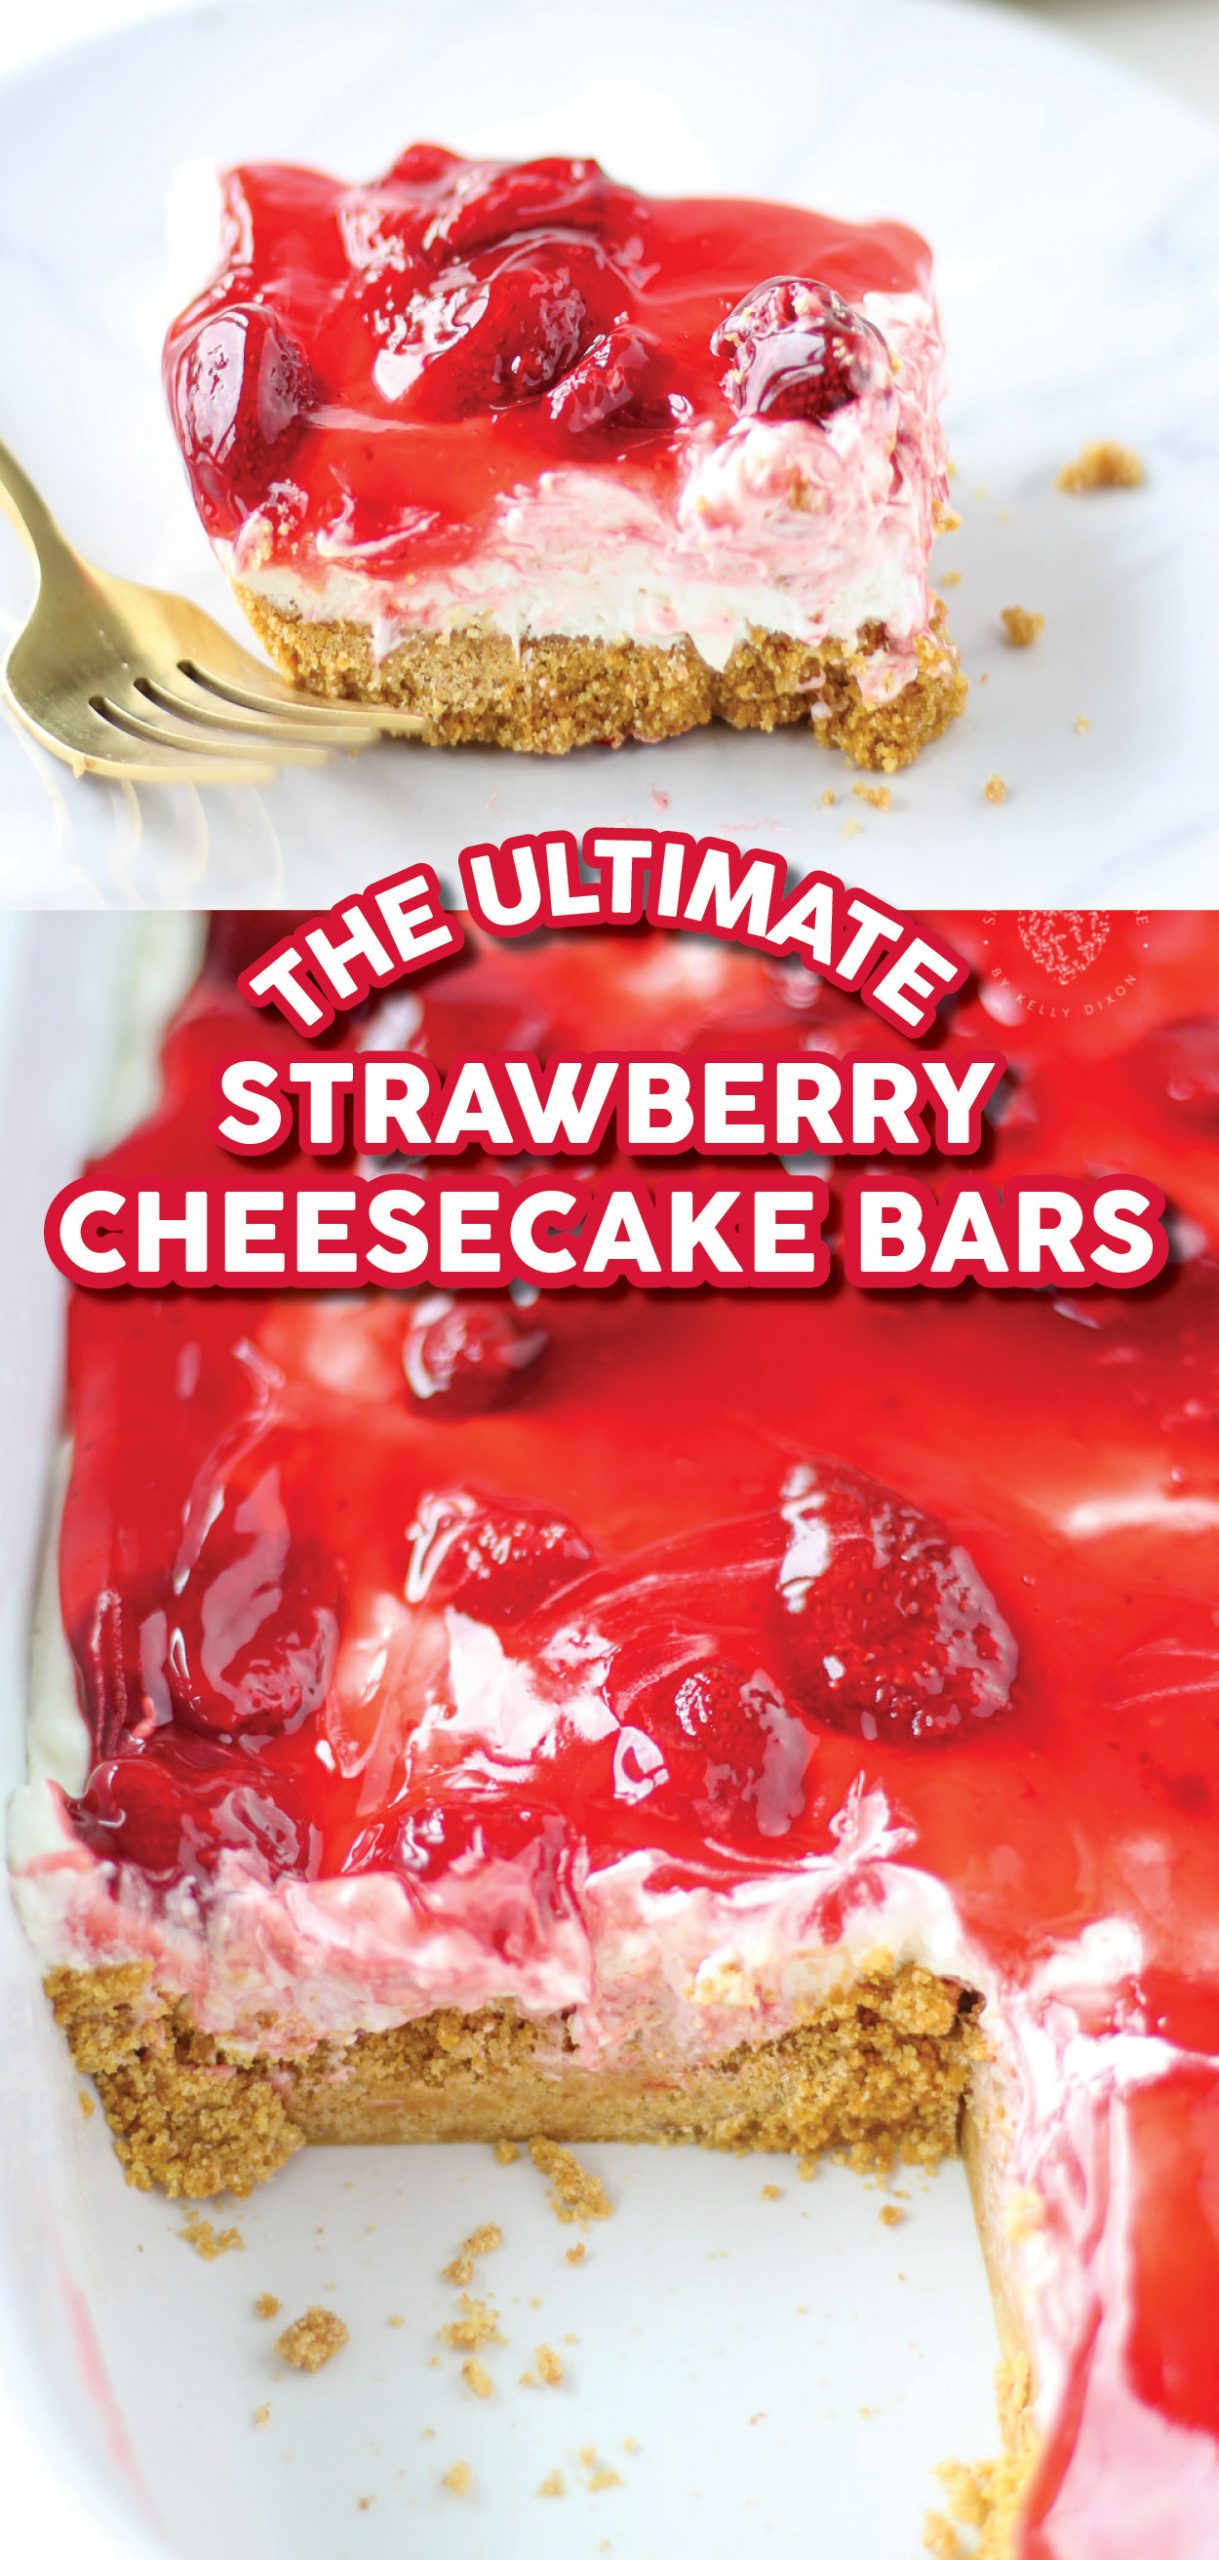 Easy Strawberry Cheesecake Bars, these irresistible squares are quick, easy and so delicious! Made with a graham cracker crust and strawberry filling. Easy and tasty bars.